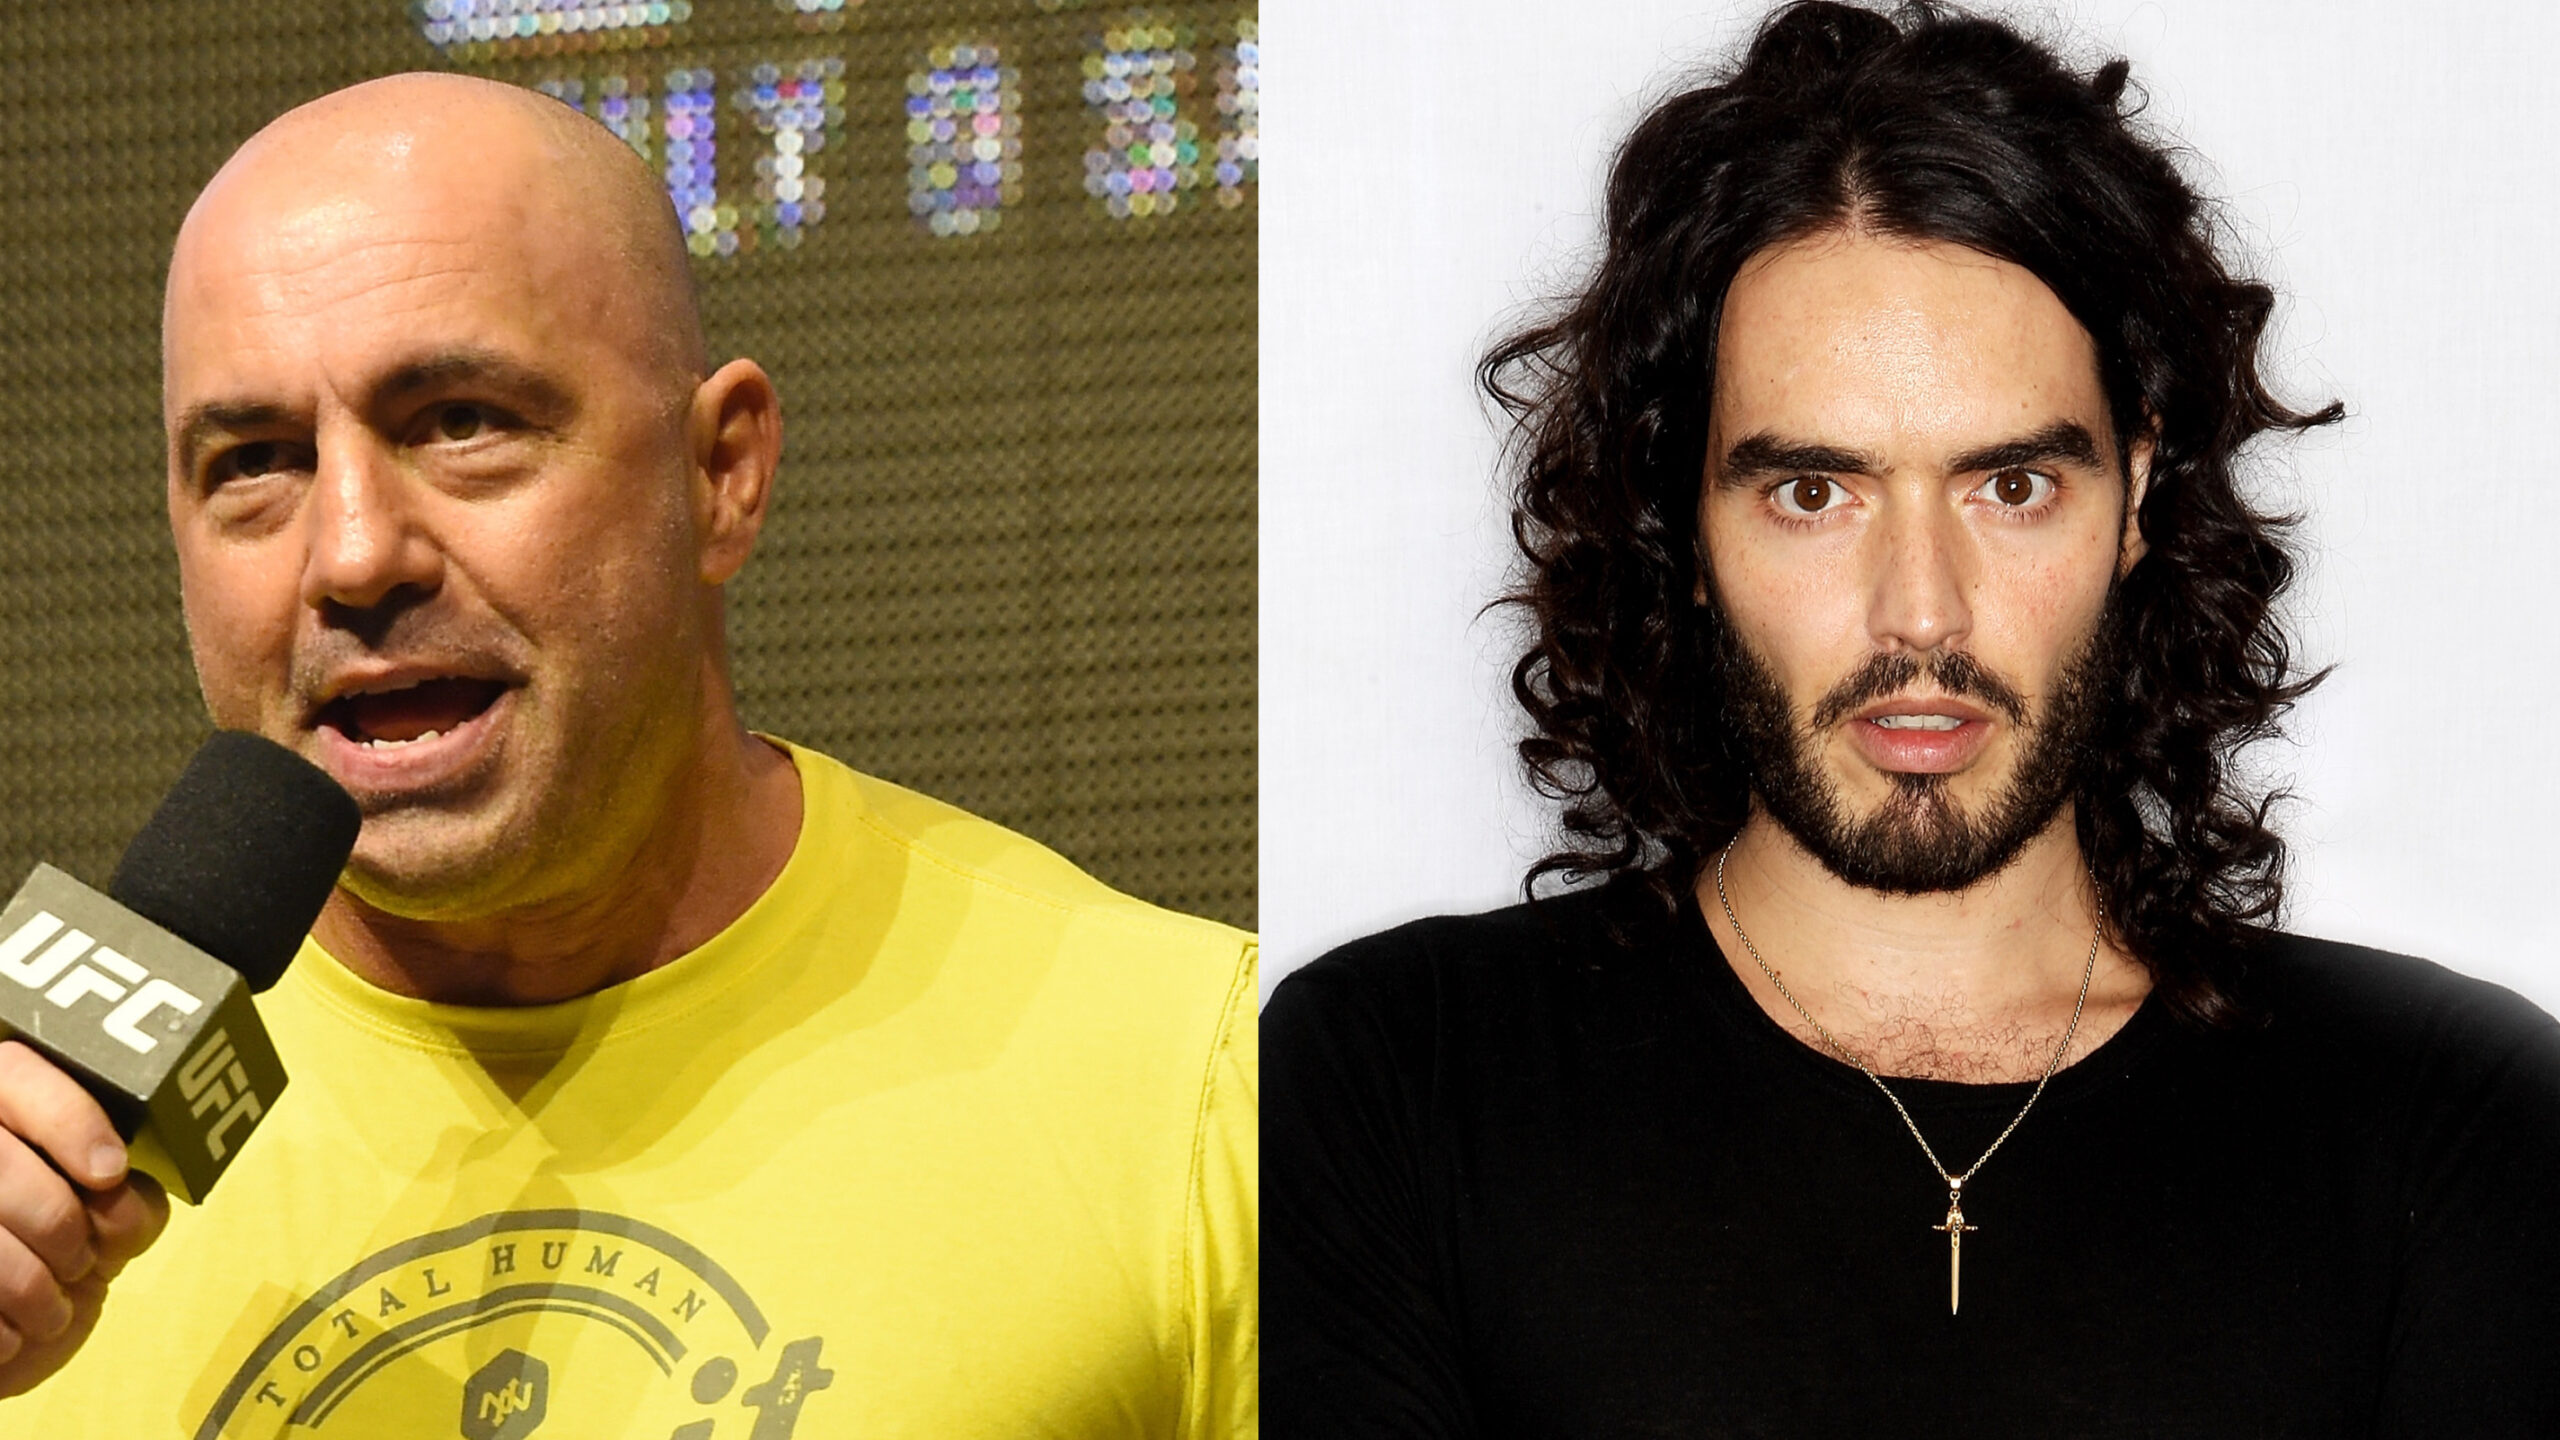 Joe Rogan, Russell Brand Slam Critics Who’ve Labeled Them And Others ‘Right-Wing’ For Being Against ‘Censorship’